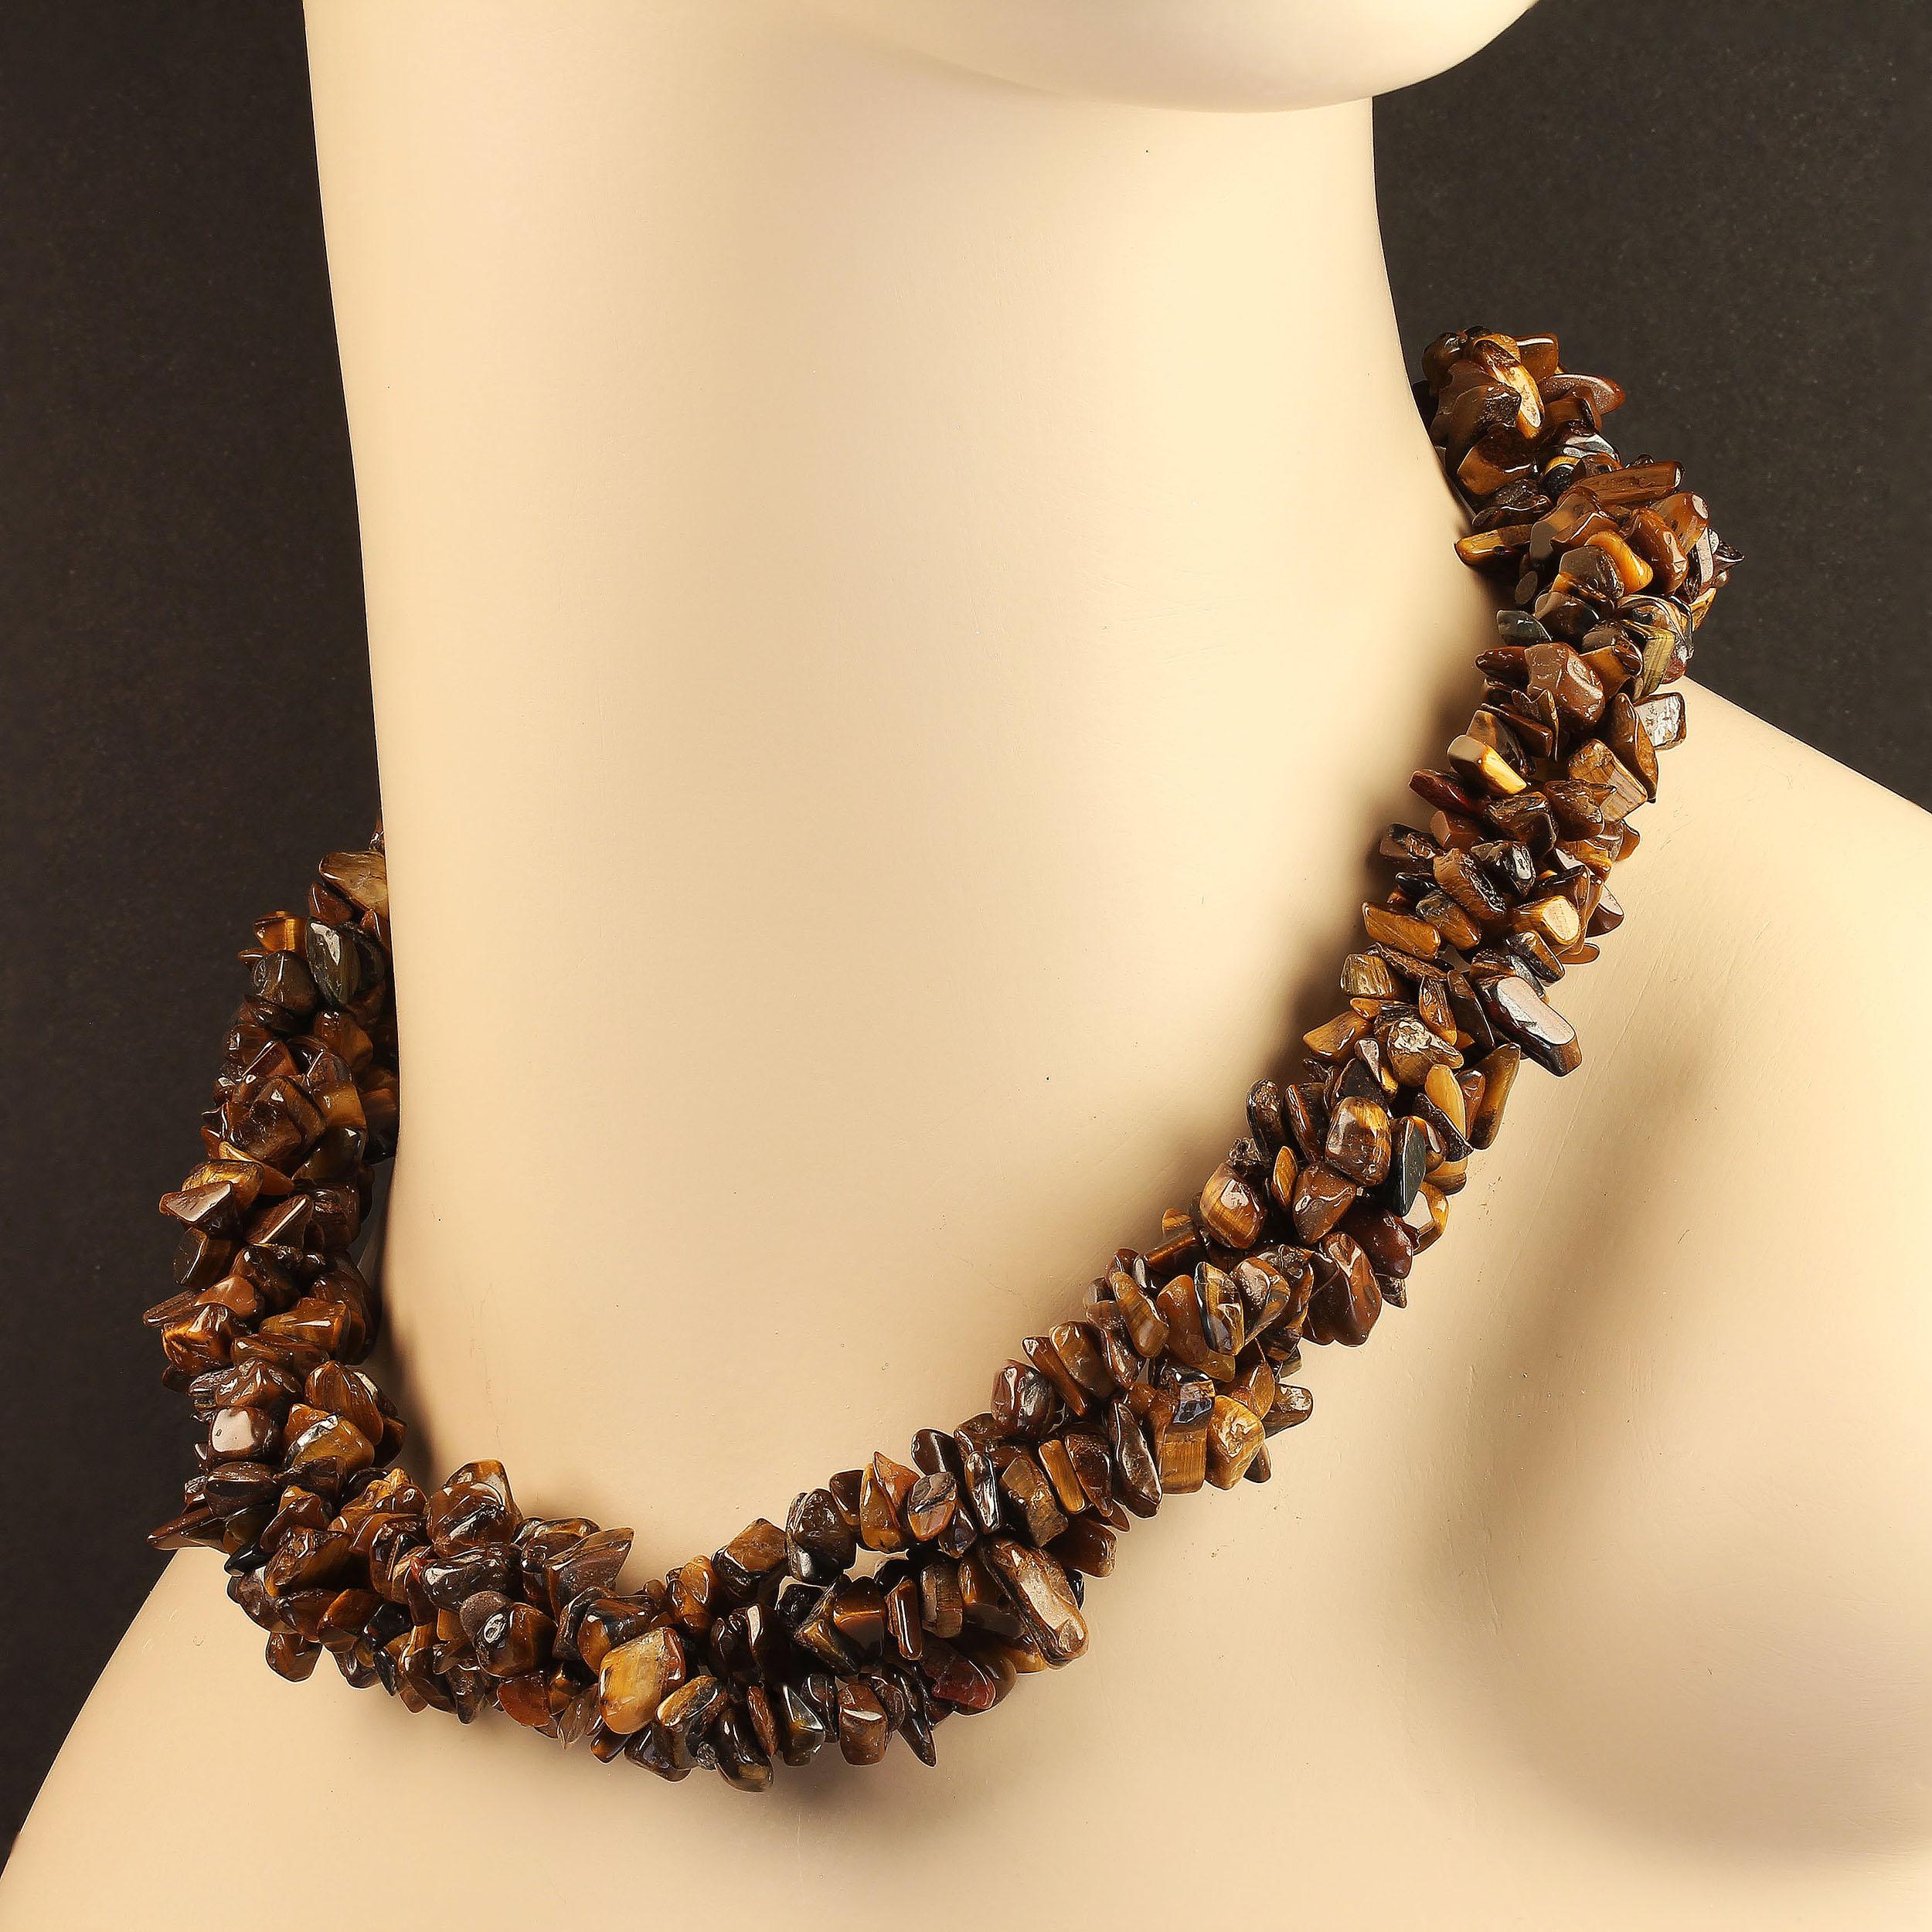 Two 36 inch infinity necklaces of chatoyant Tiger's Eye.  These wonderfully versatile necklaces can be worn long or twisted for a shortened more elegant tailored look.  Tiger's Eye is a form of chatoyant quartz.  This brown Tiger's Eye is highly